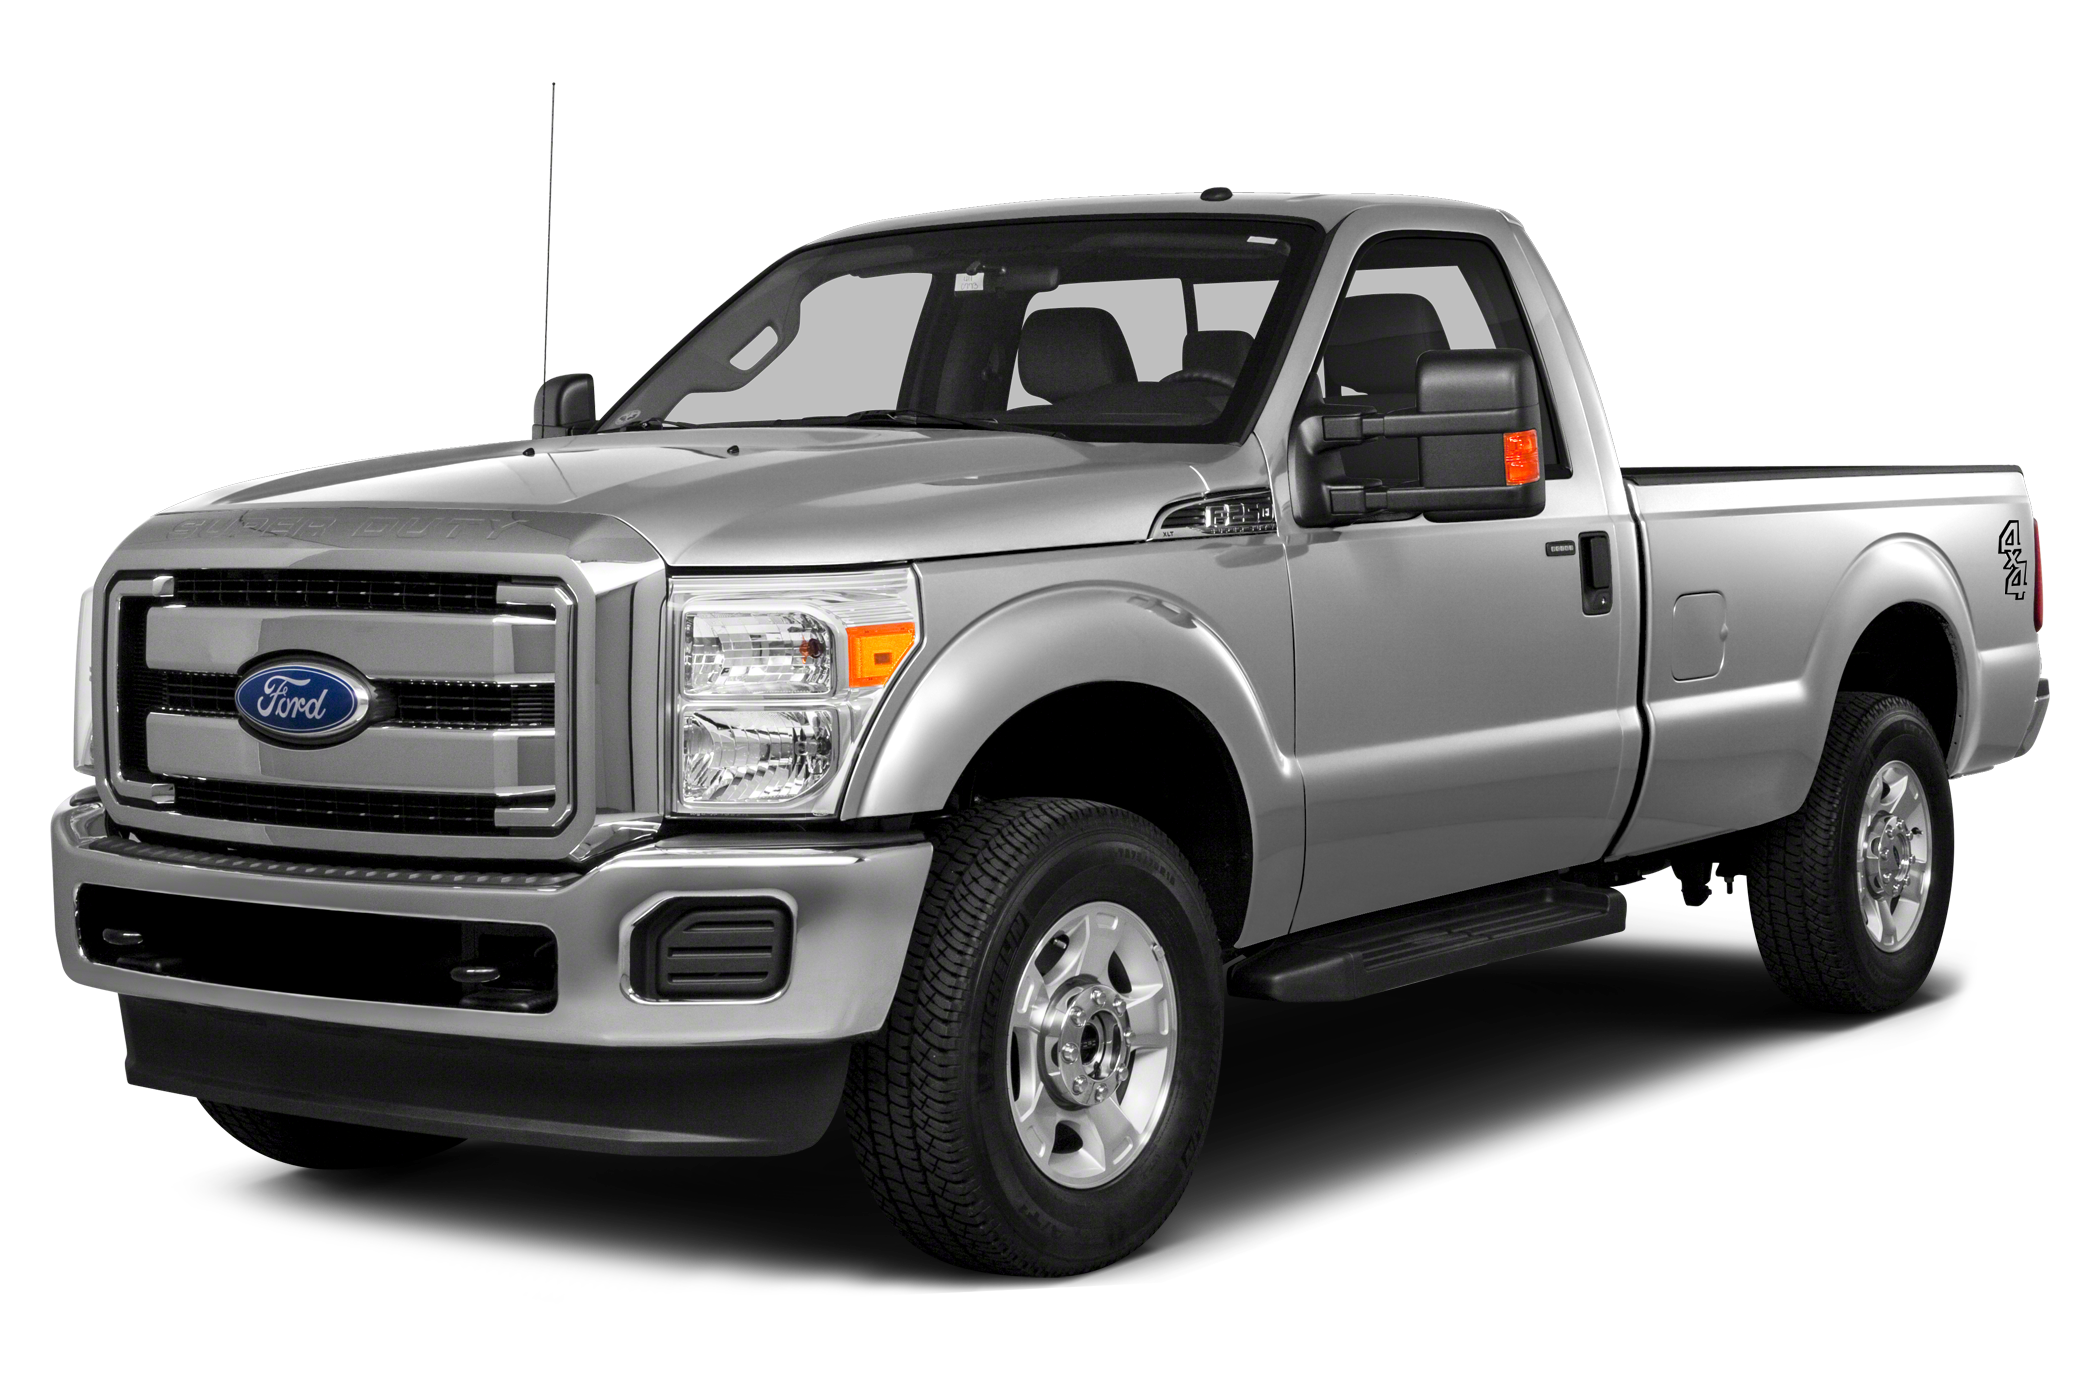 2016 Ford F-250 Specs